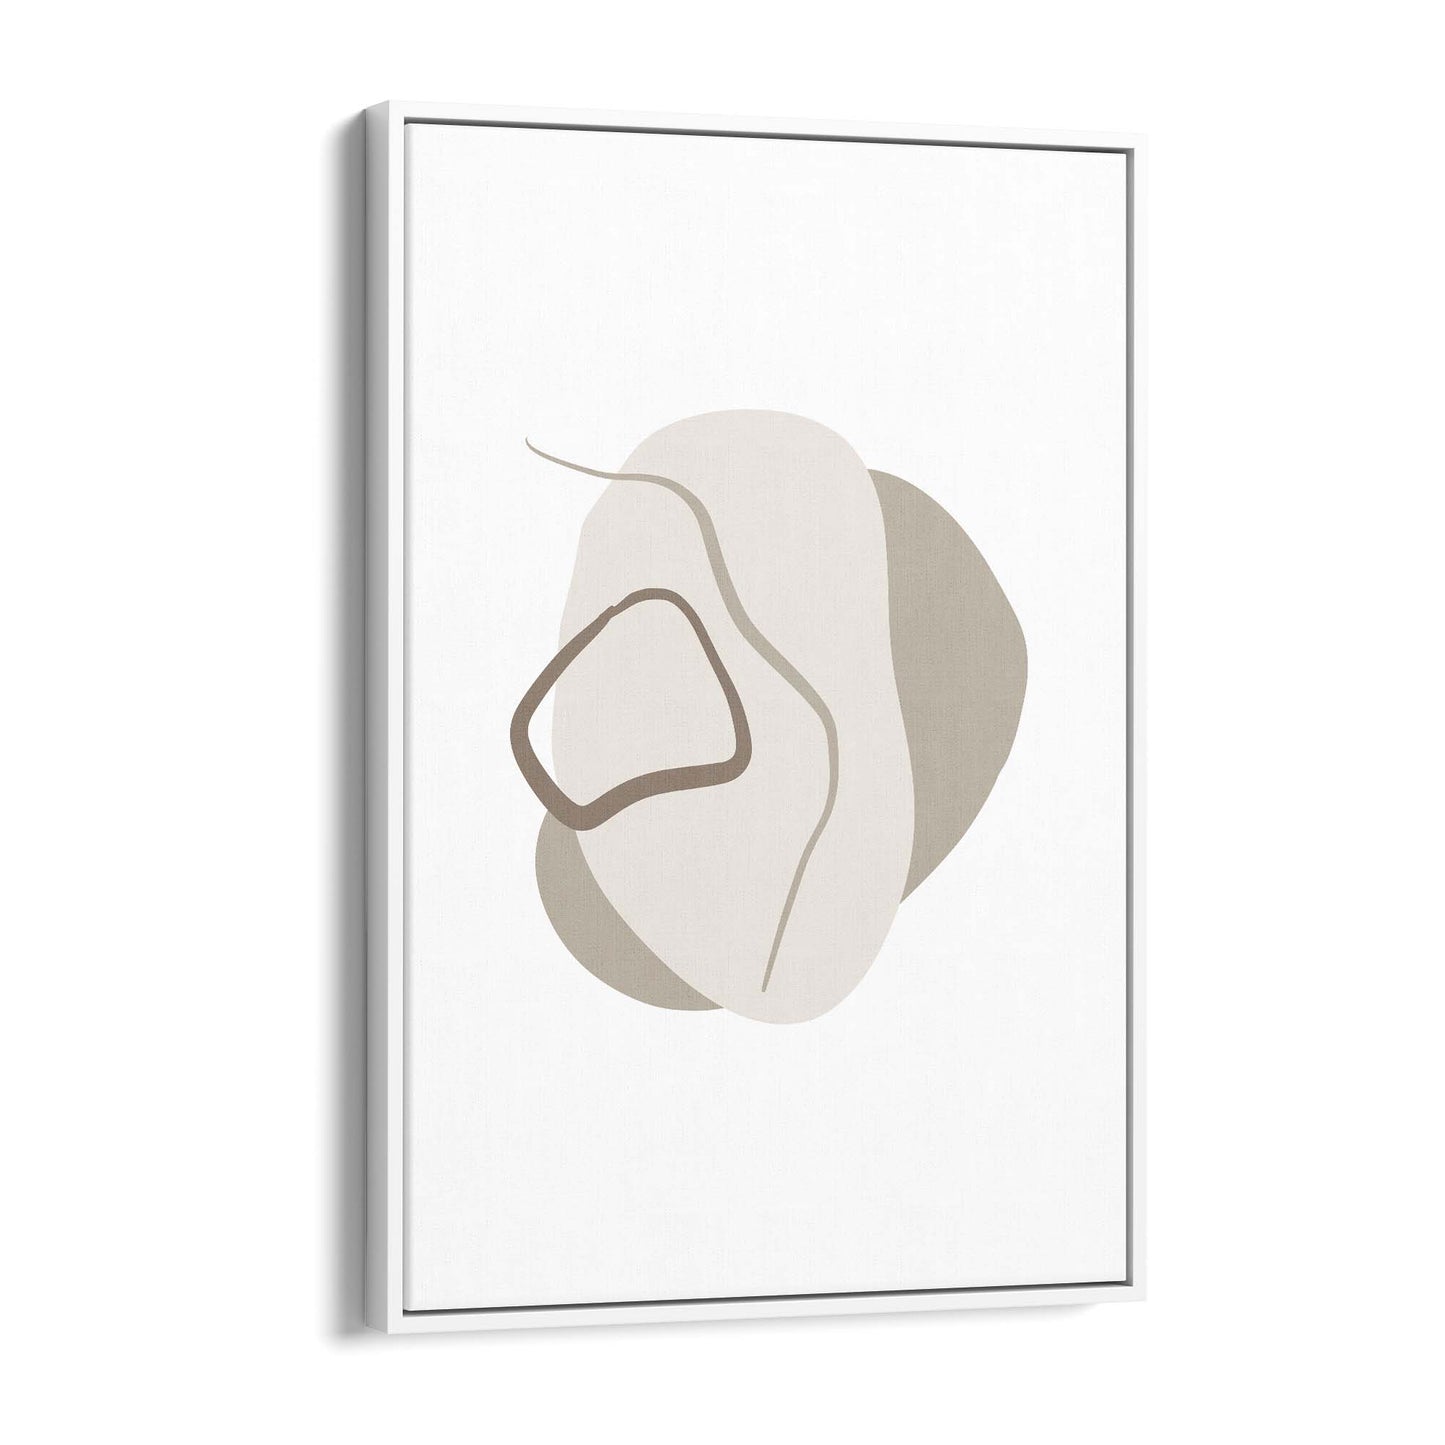 Minimal Black & White Shapes Abstract Wall Art #3 - The Affordable Art Company